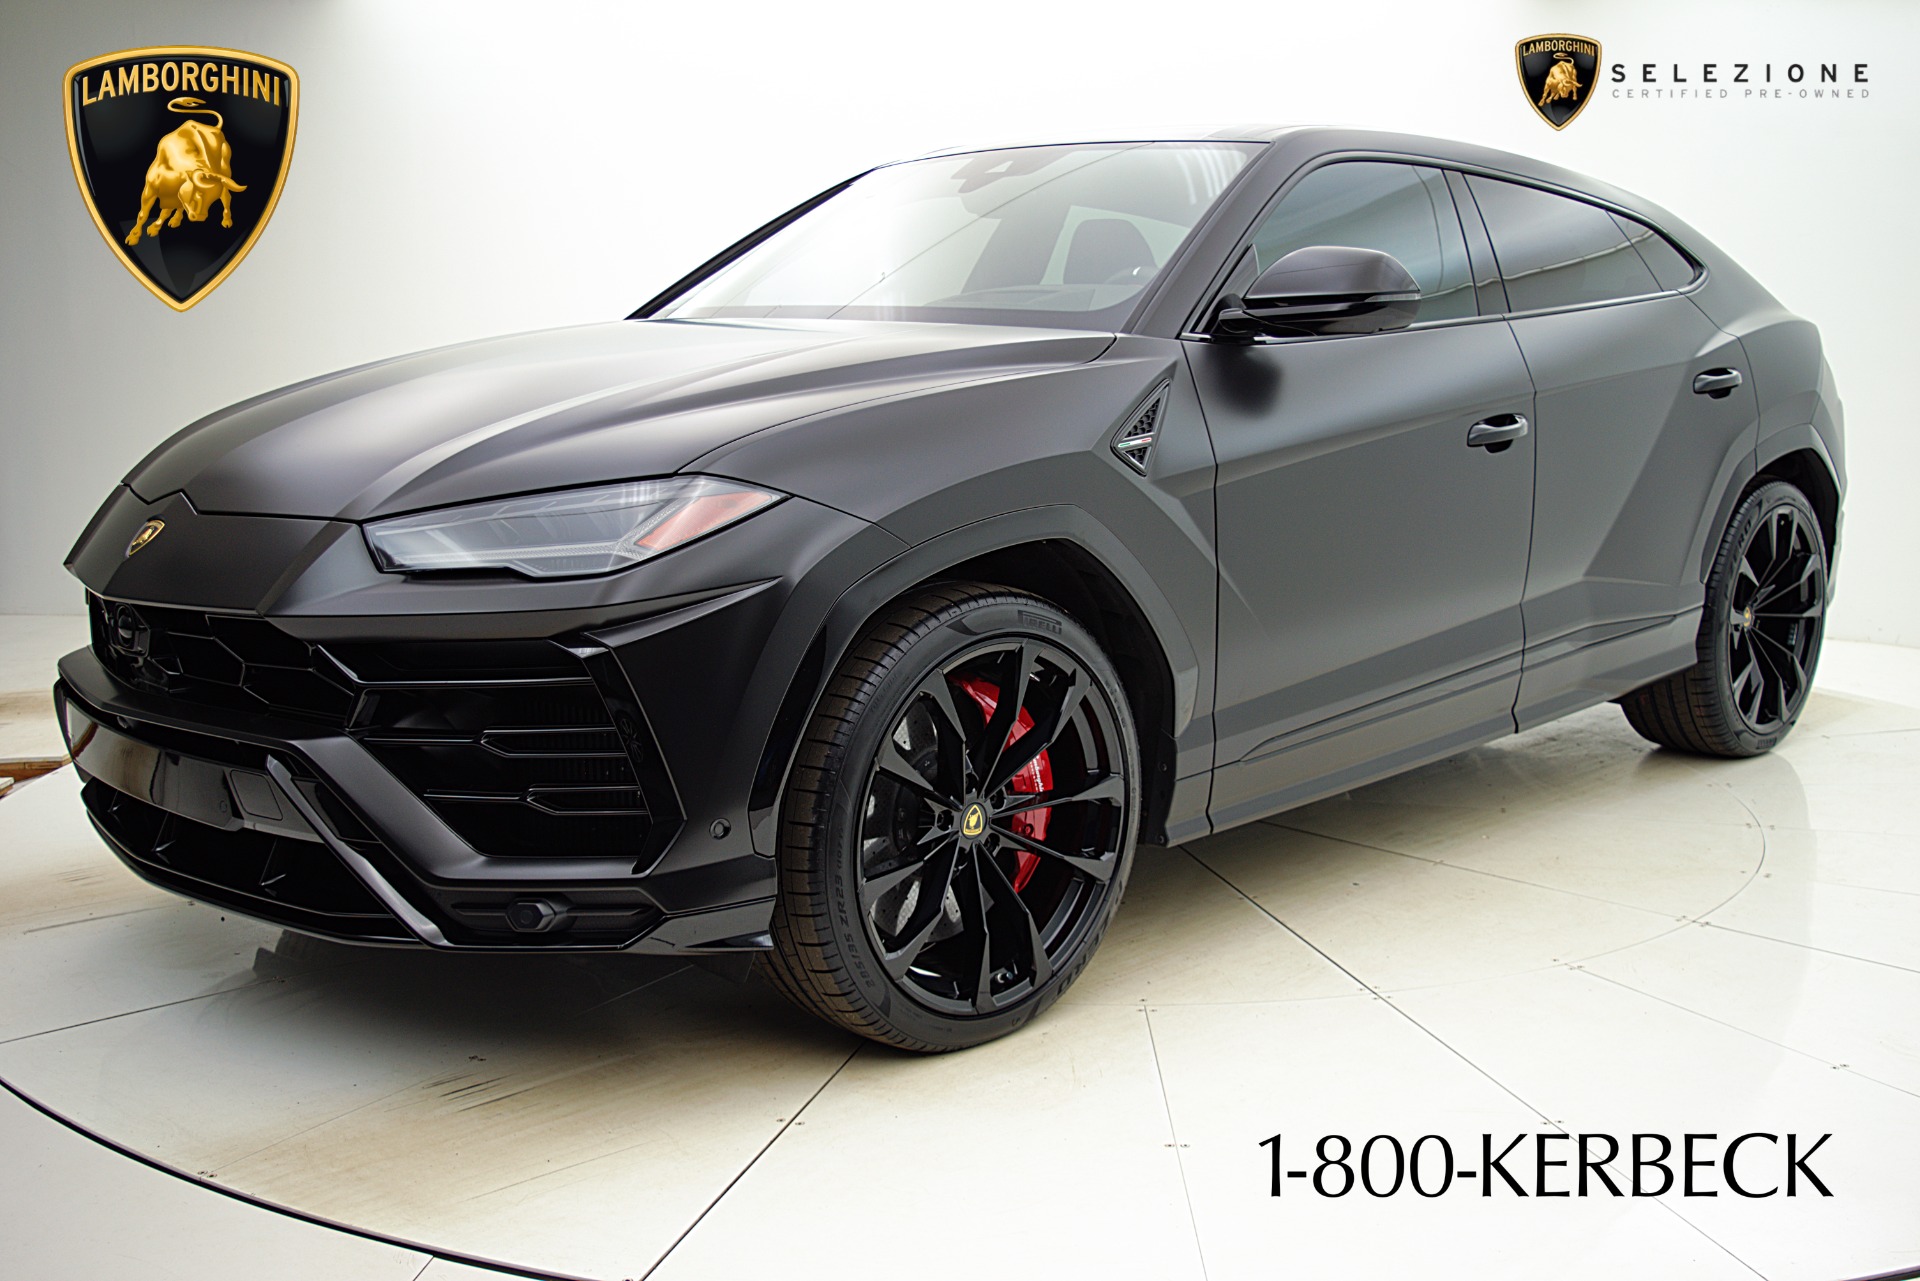 Used 2019 Lamborghini Urus / LEASE OPTIONS AVAILABLE for sale Sold at Bentley Palmyra N.J. in Palmyra NJ 08065 2